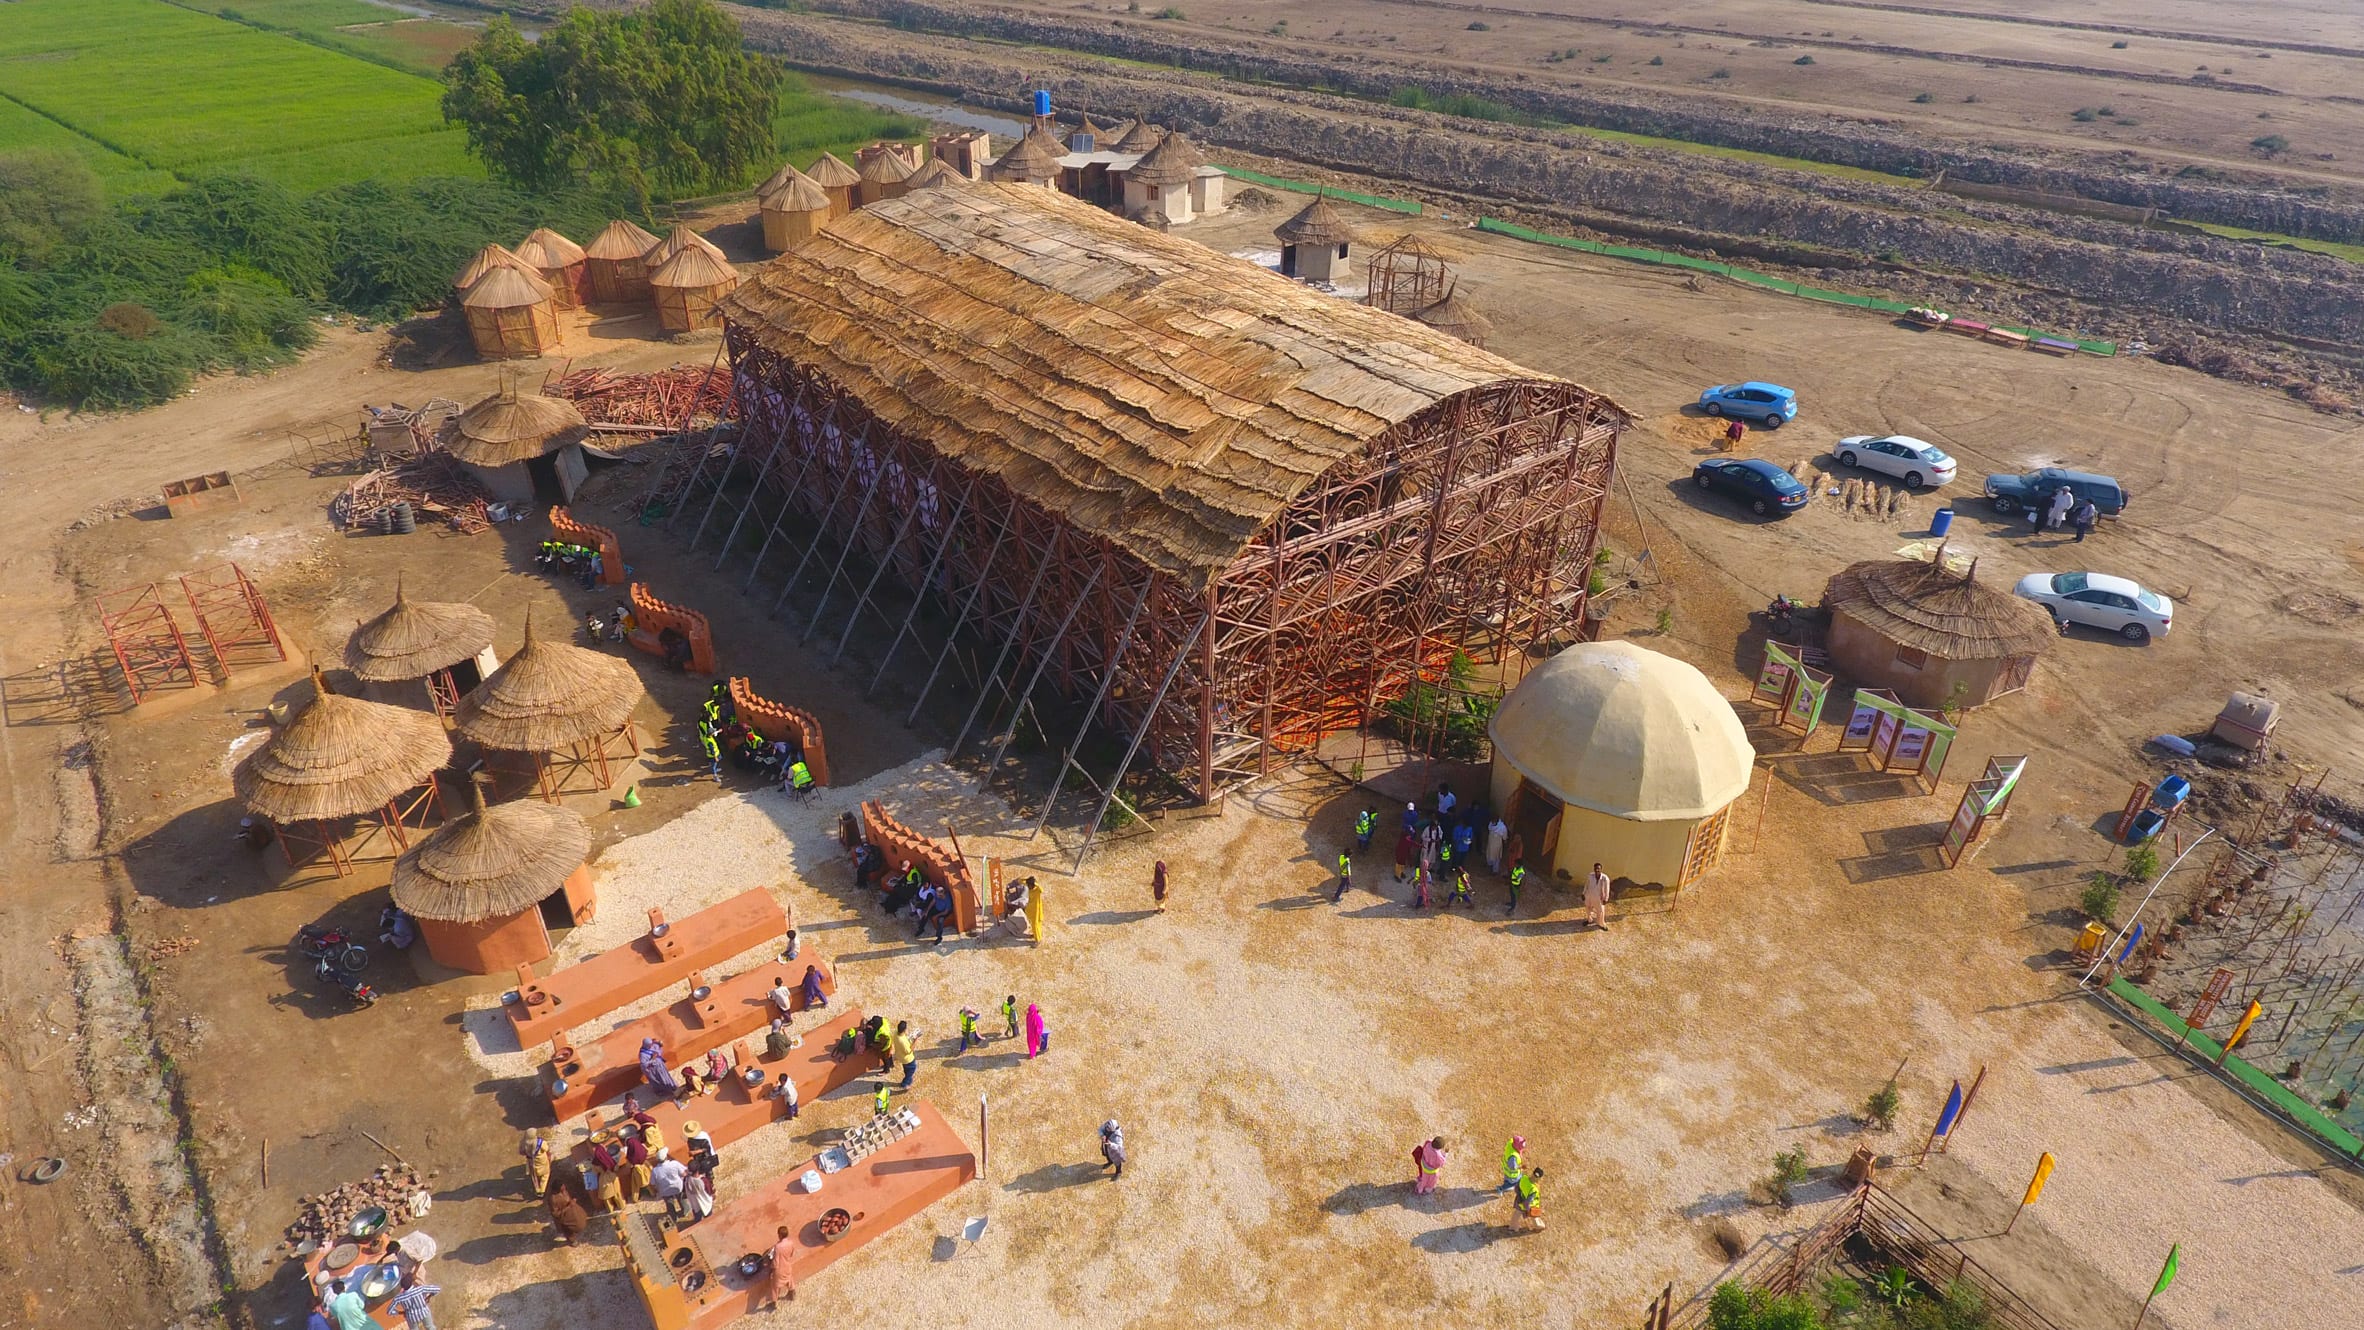 Aerial view of Zero Carbon Cultural Centre in Makli by Yasmeen Lari